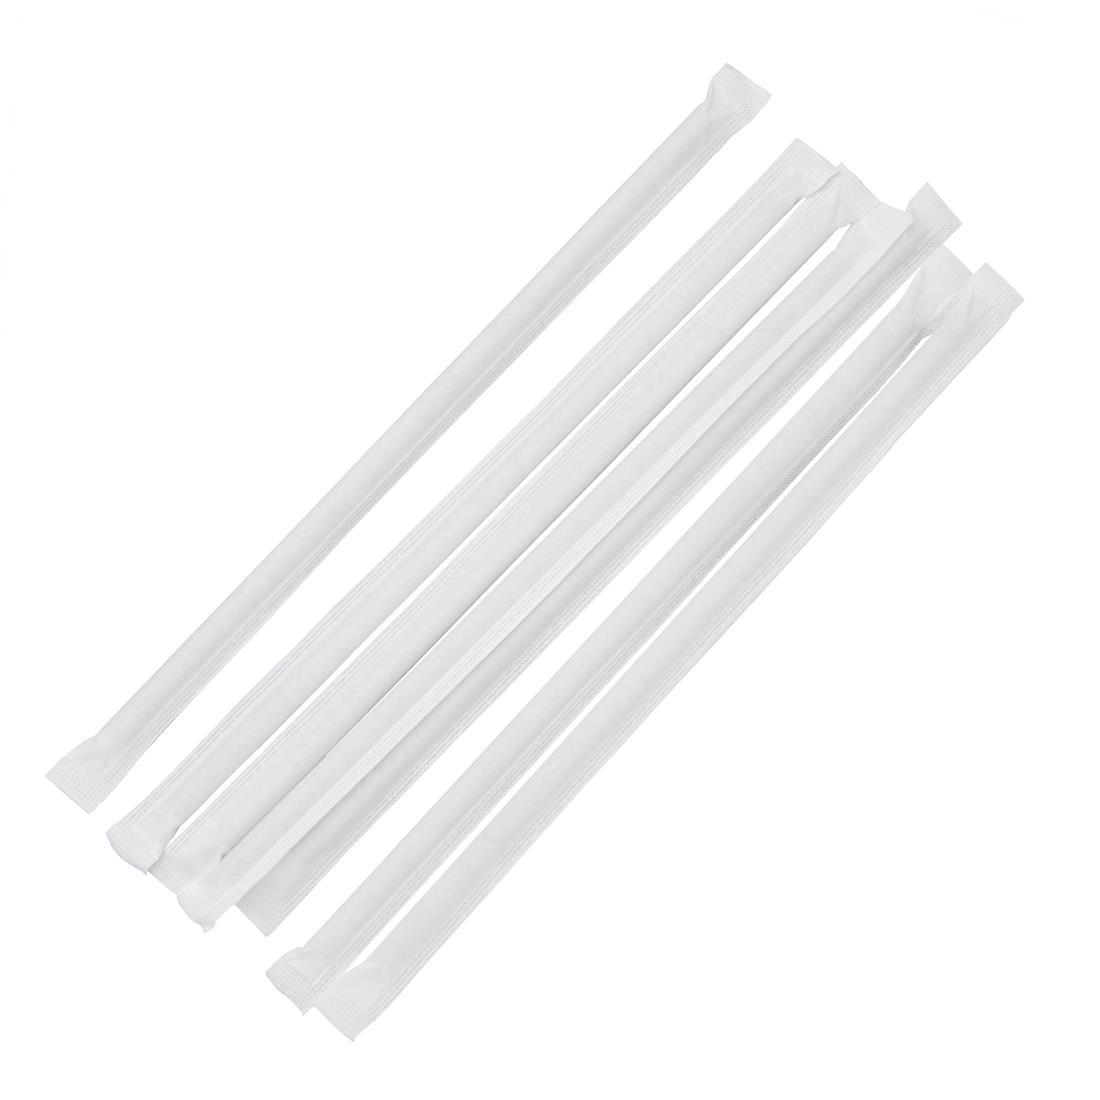 Fiesta Compostable Individually Wrapped Bendy Paper Straws Black (Pack of 250) - FP444  - 6